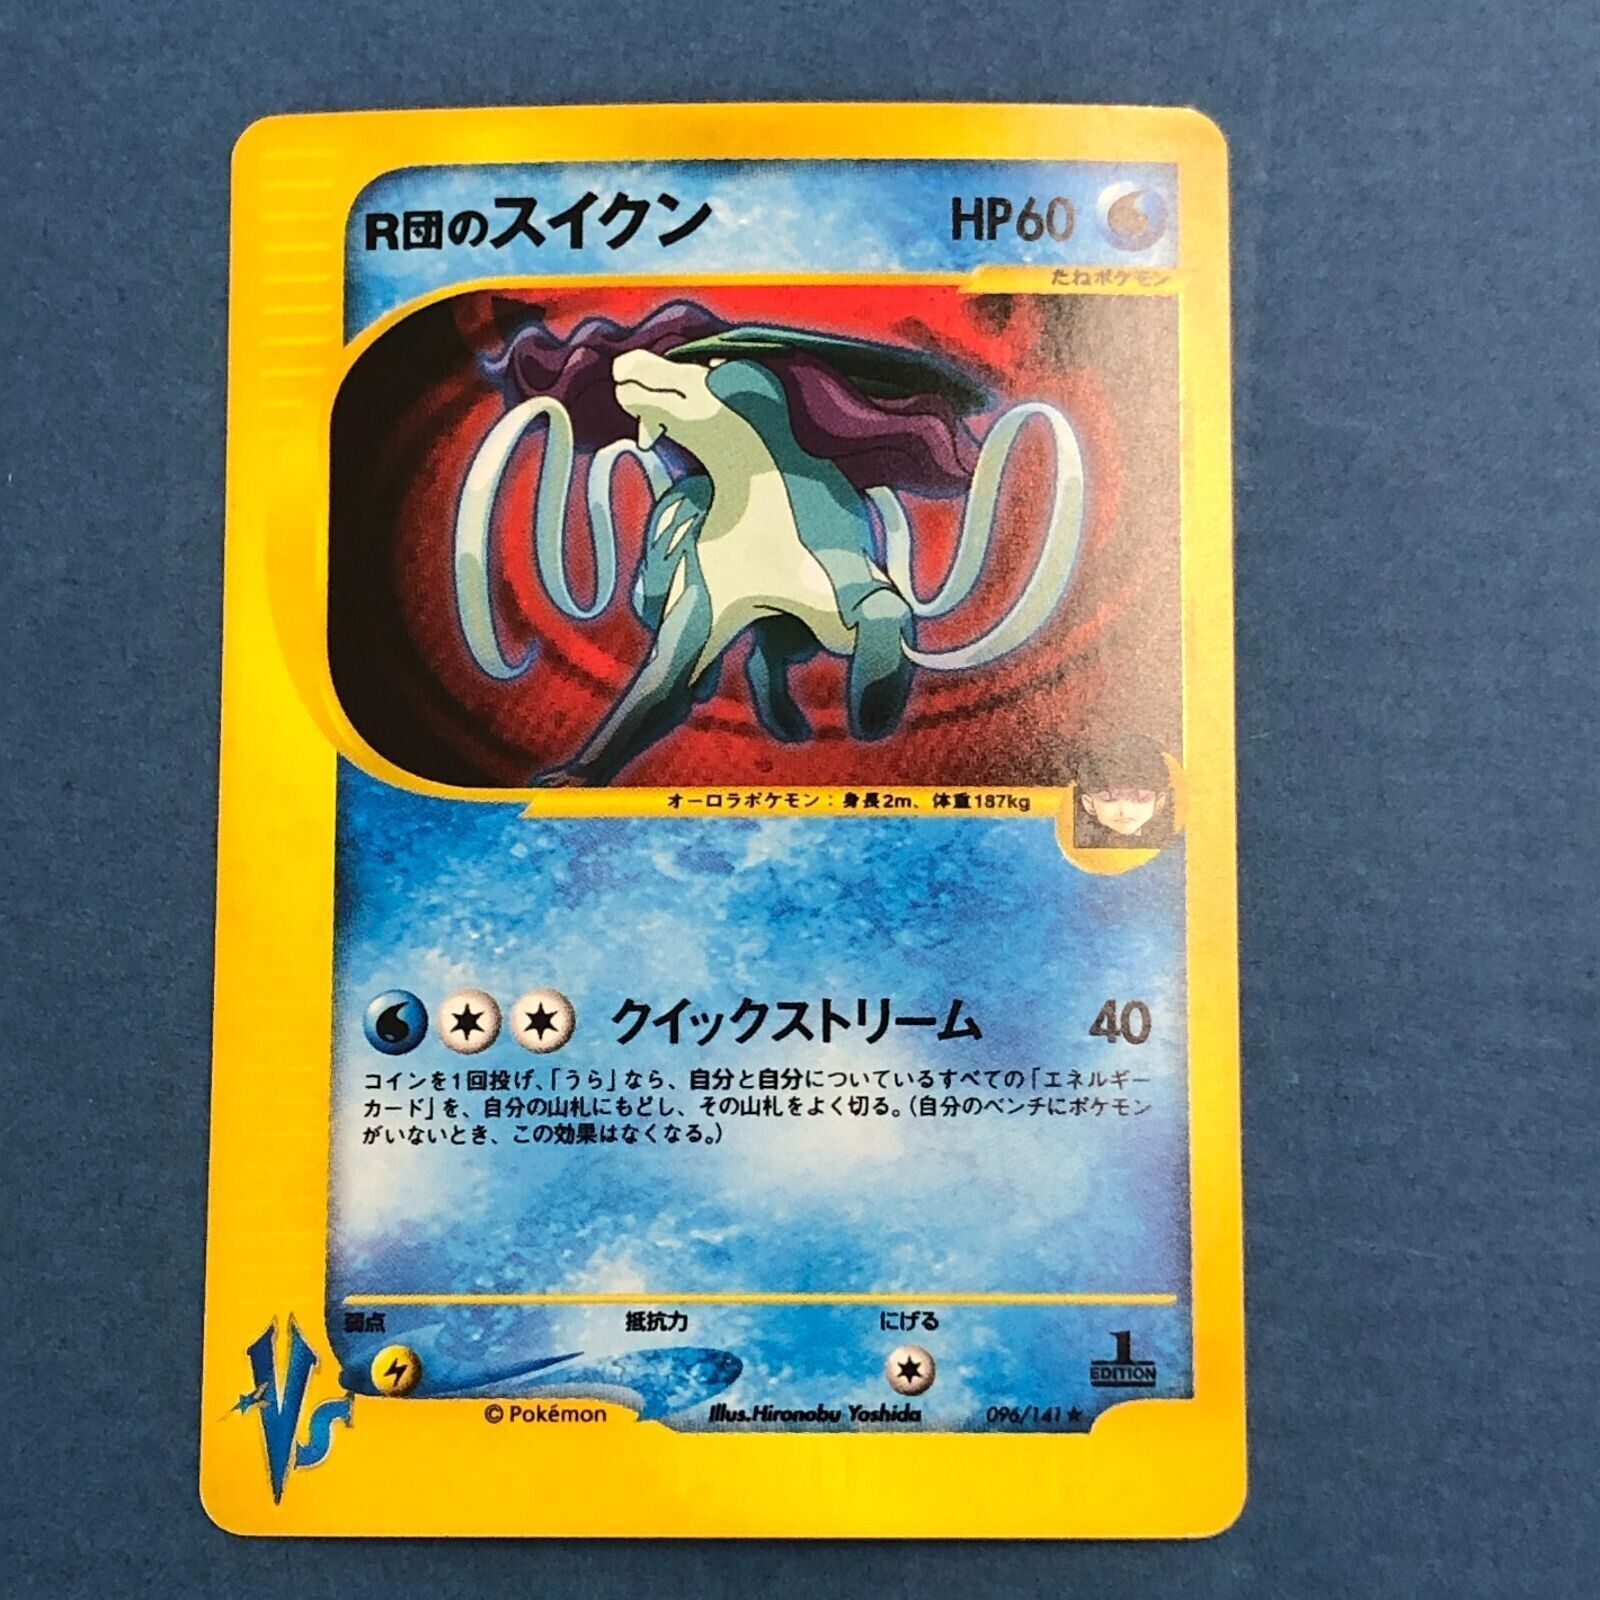 Rocket's Suicune 1stEd 096/141 VS Series Holo EX Japanese Pokemon Card excellent